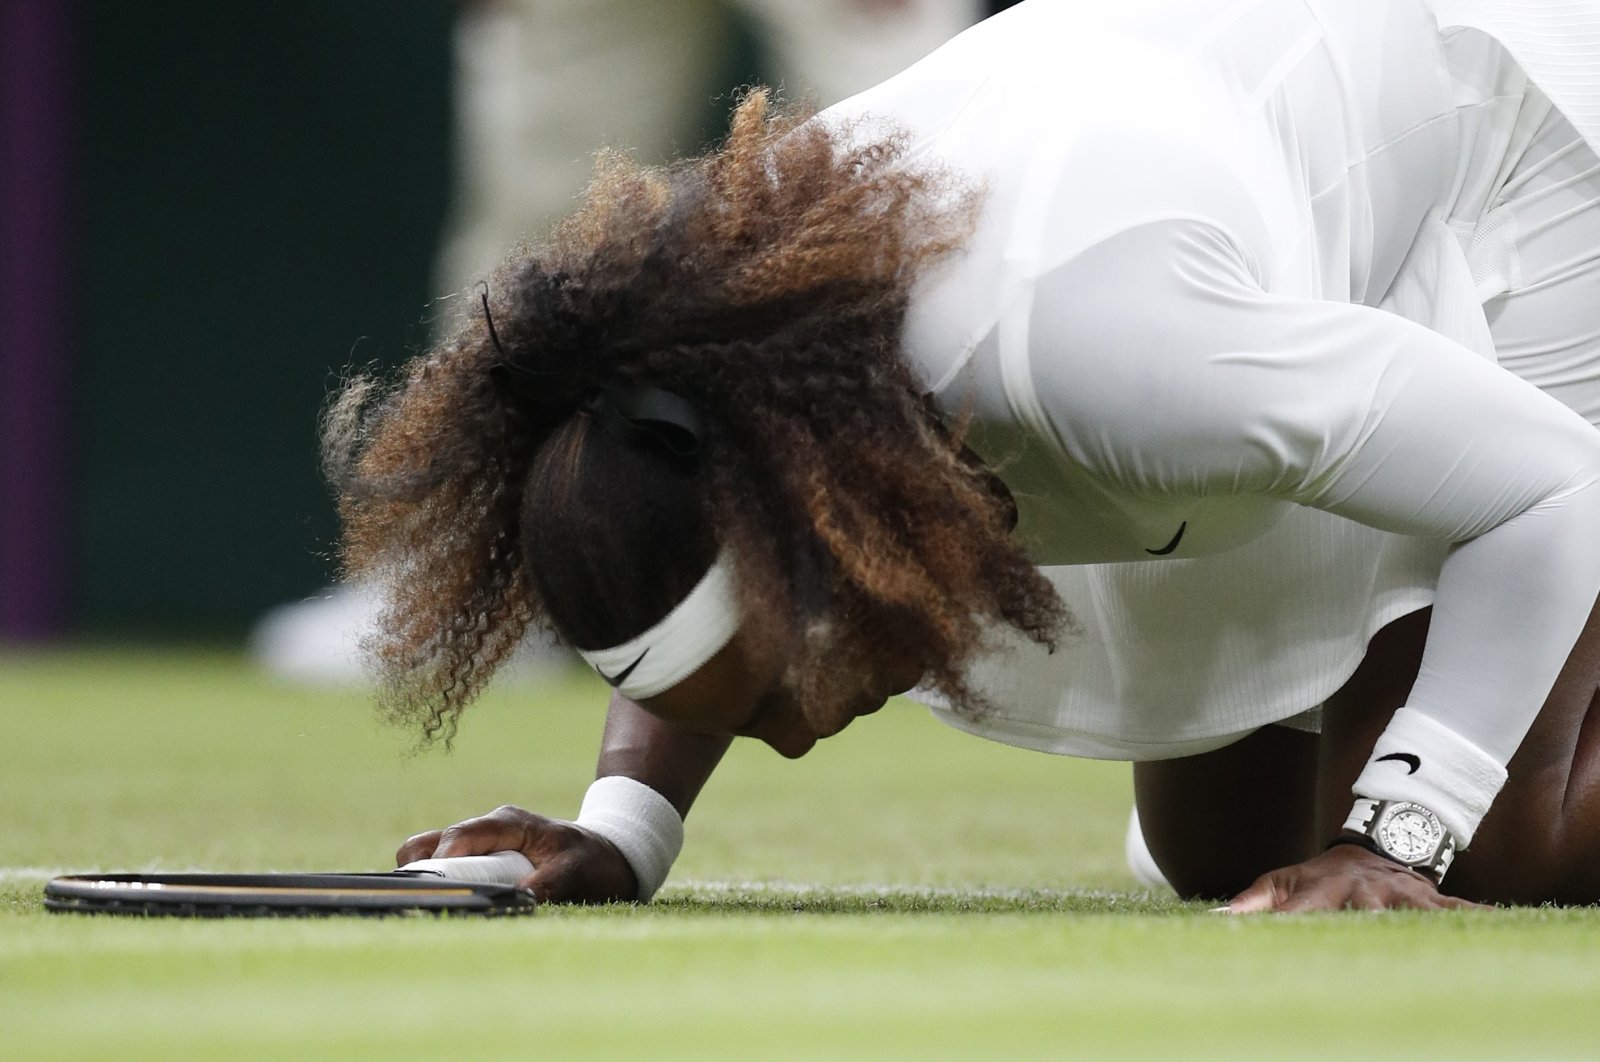 Serena Williams of the U.S. reacts after sustaining an injury during her first round match against  Belarus' Aliaksandra Sasnovich at All England Lawn Tennis and Croquet Club in London, Britain, June 29, 2021 (Reuters Photo)